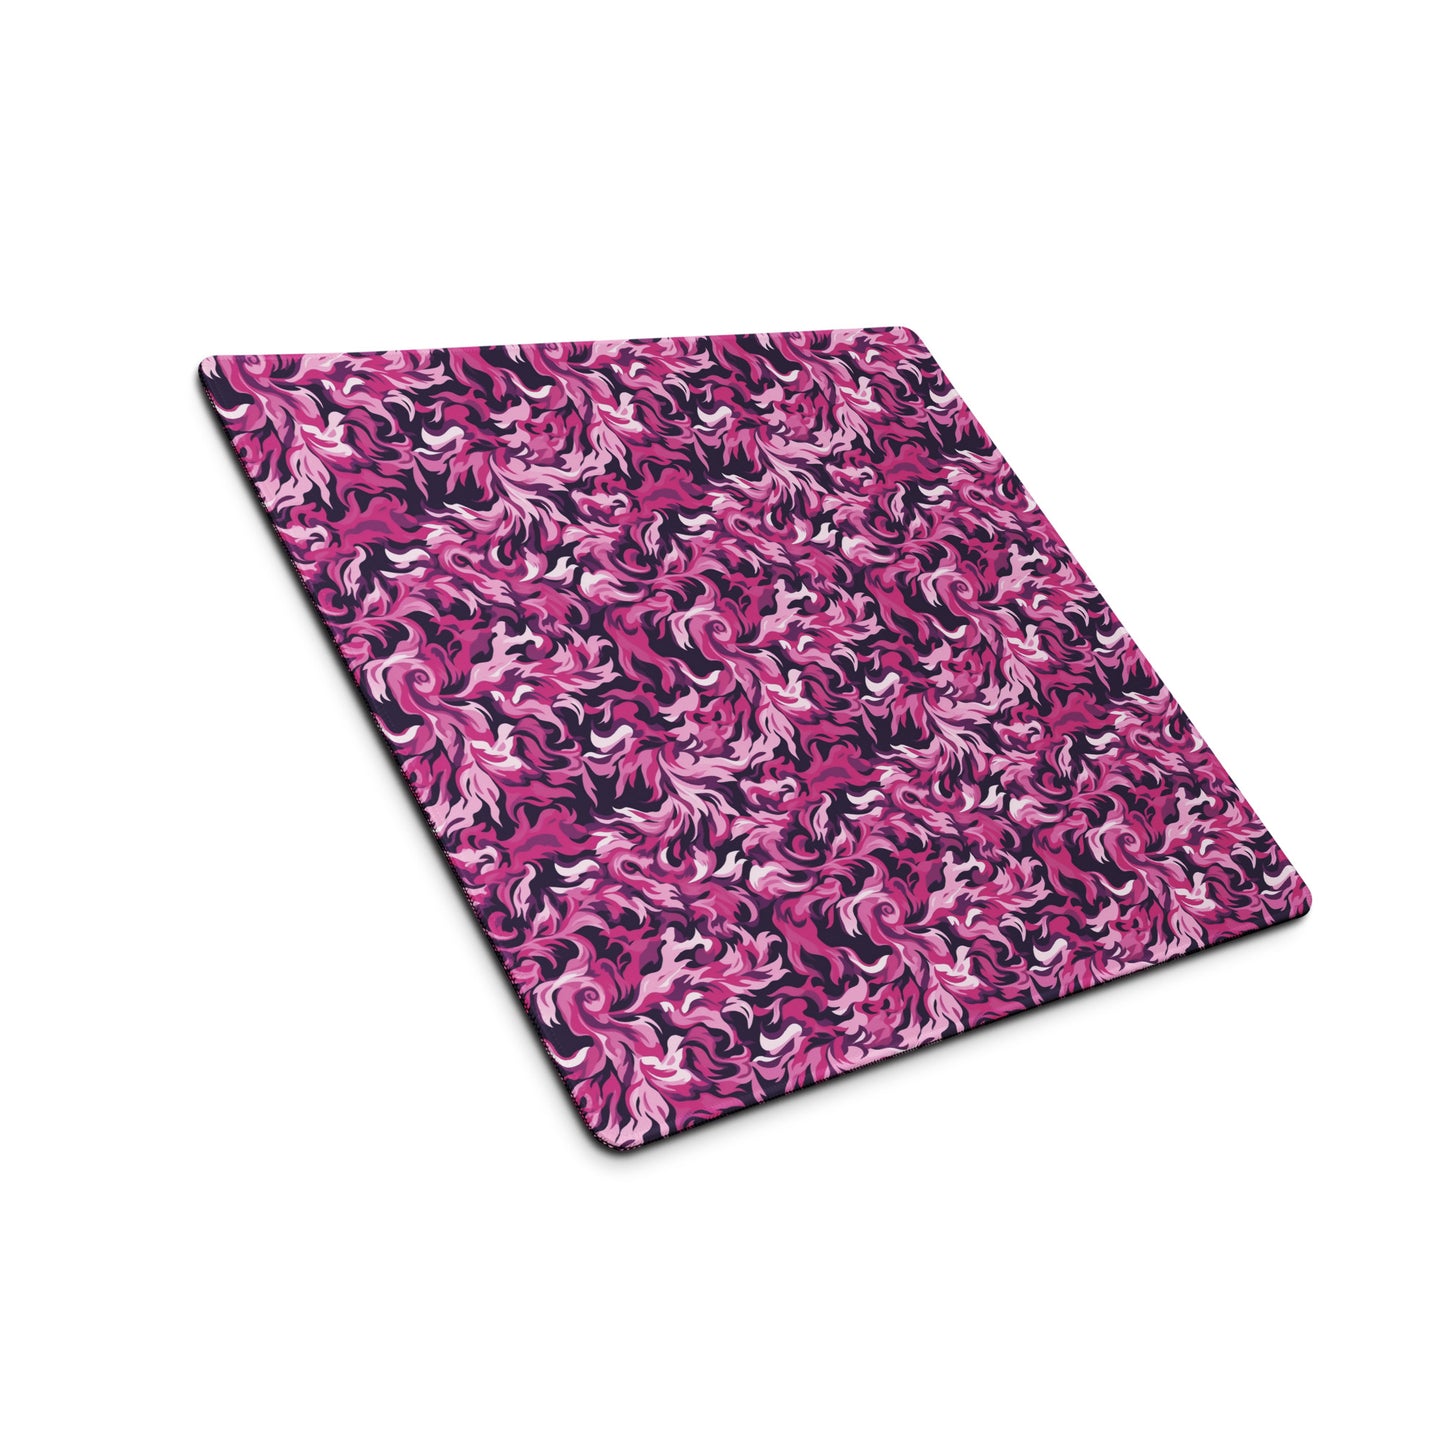 A 18" x 16" desk pad with a pink and magenta camo pattern sitting at an angle.